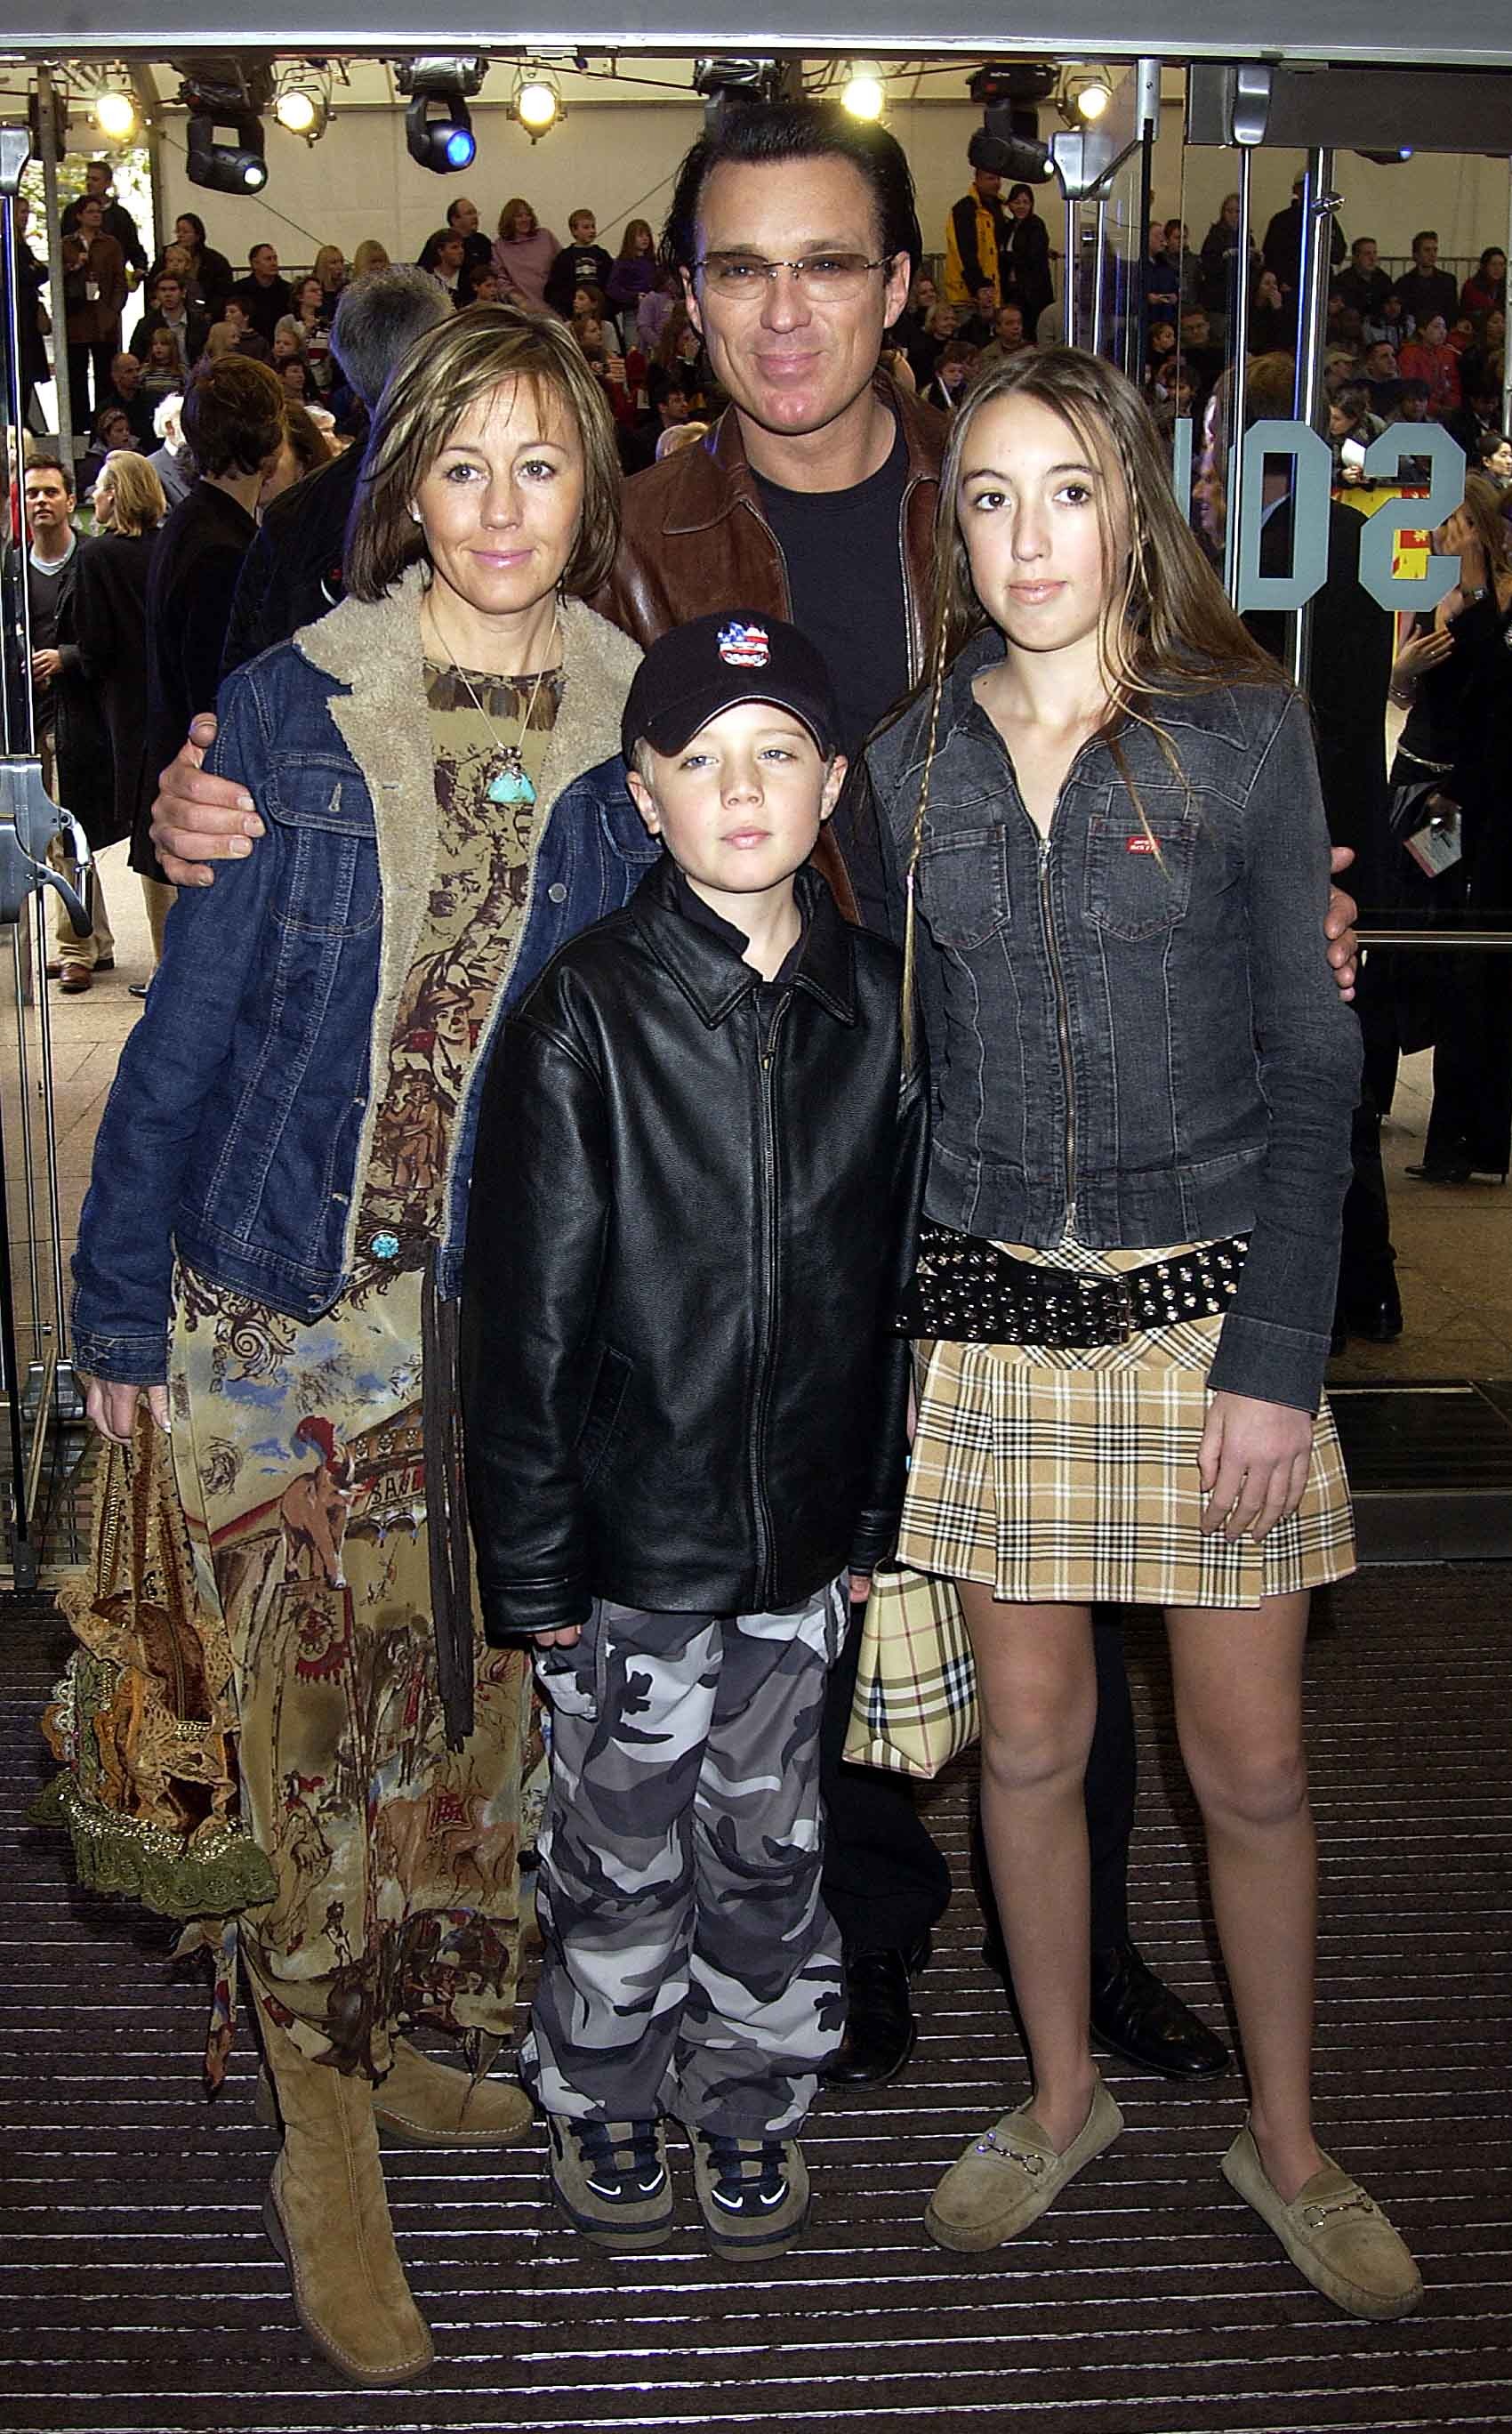  Roman is seen here in 2001 with his famous dad Martin along with his mum and sister